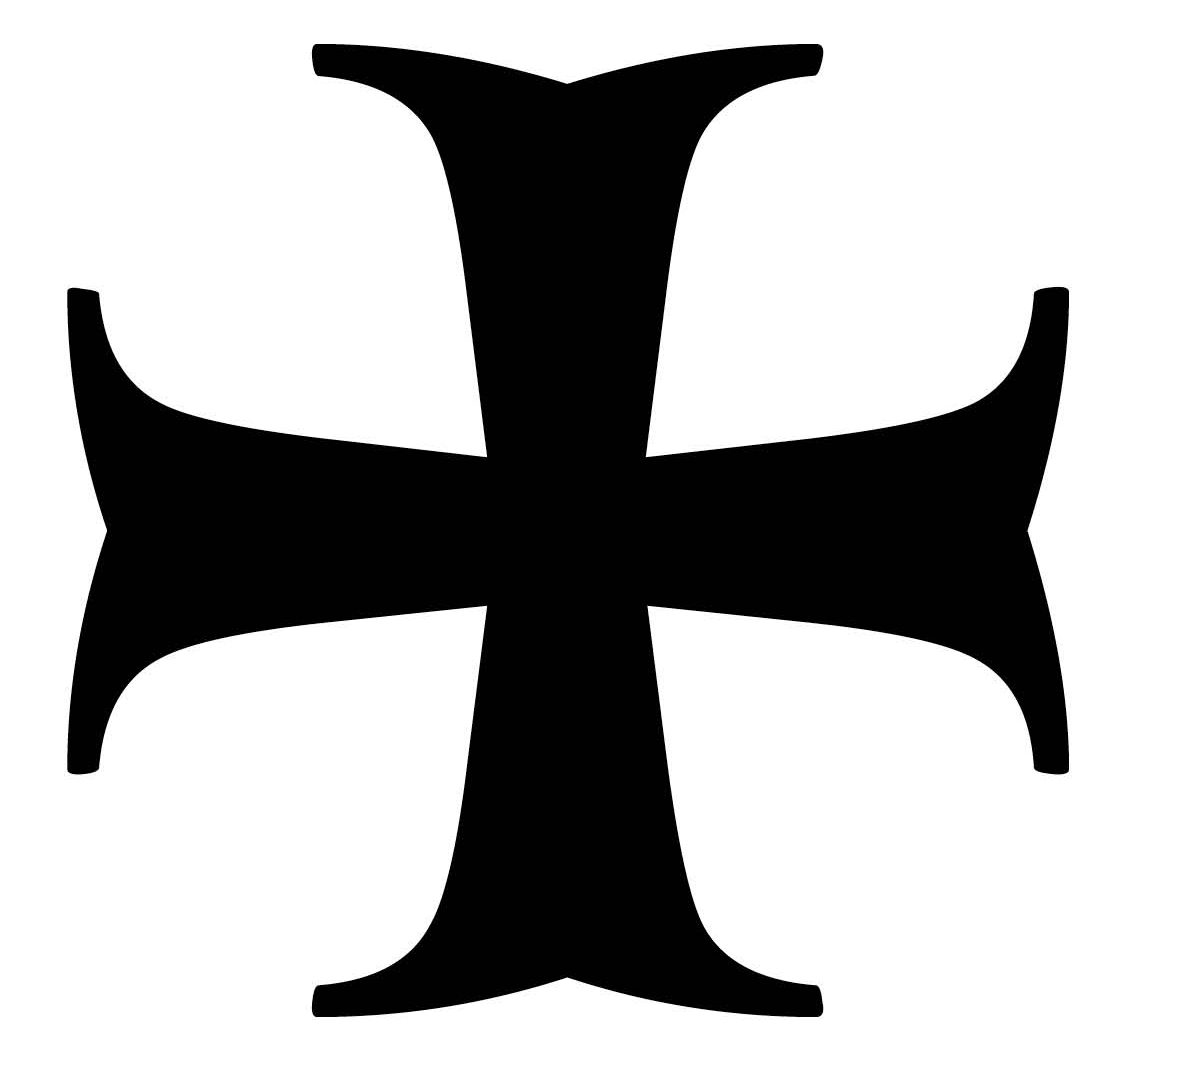 Look for this symbol in your bulletin to indicate when we will kneel together.